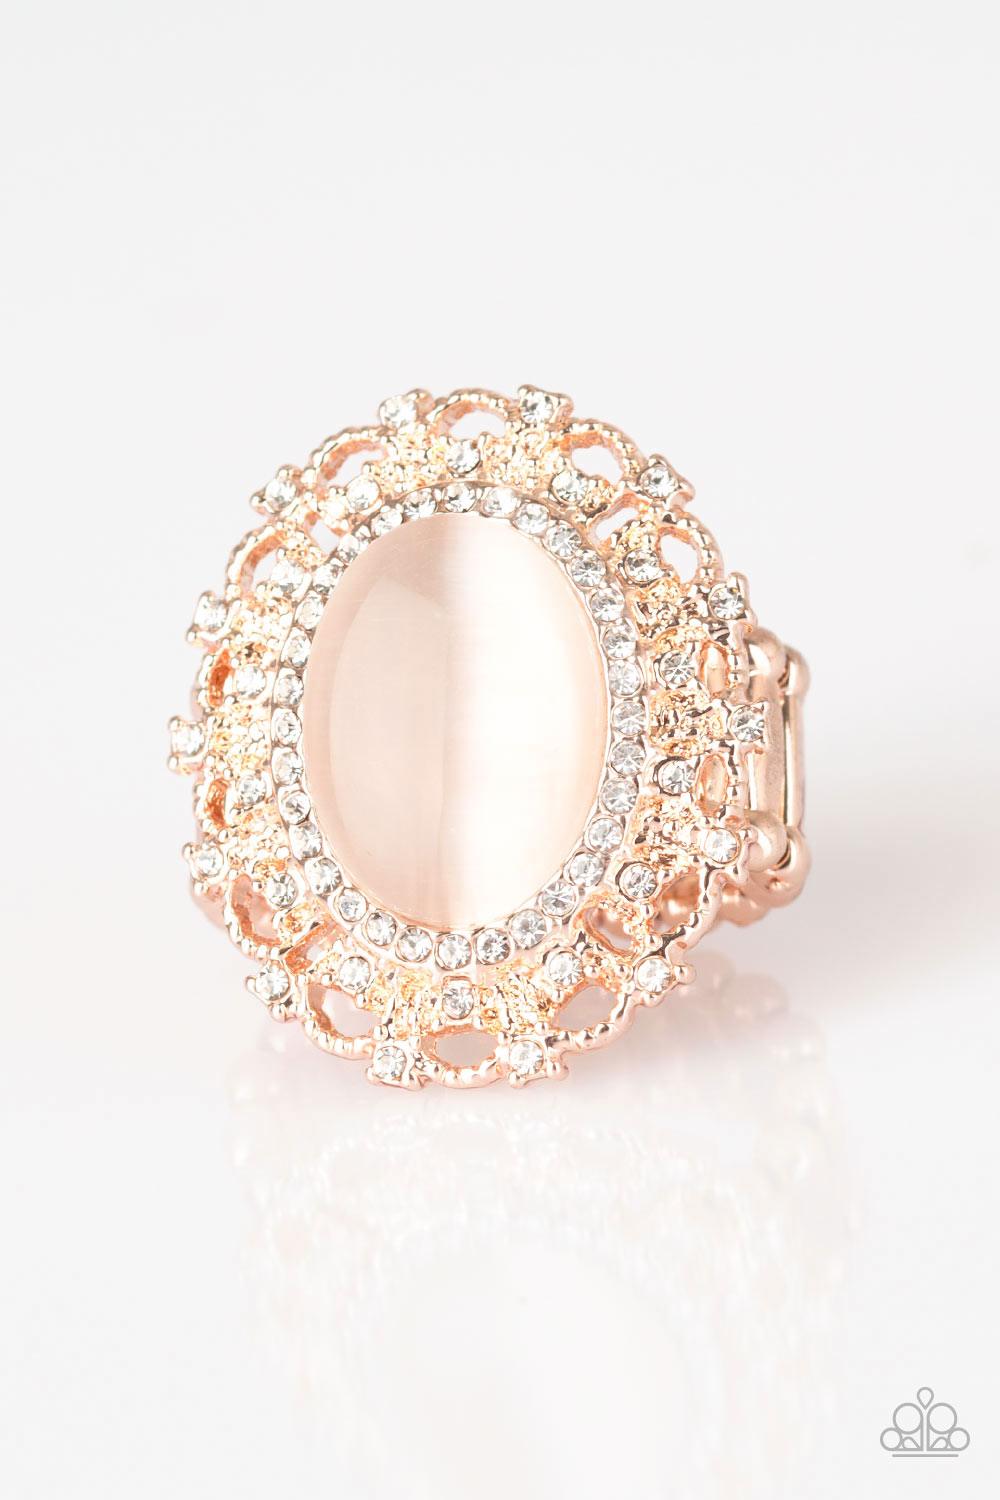 Paparazzi Accessories BAROQUE The Spell - Rose Gold Encrusted in dainty white rhinestones, a frilly rose gold frame spins around a glowing moonstone center for a regal look. Features a stretchy band for a flexible fit. Sold as one individual ring. Jewelry